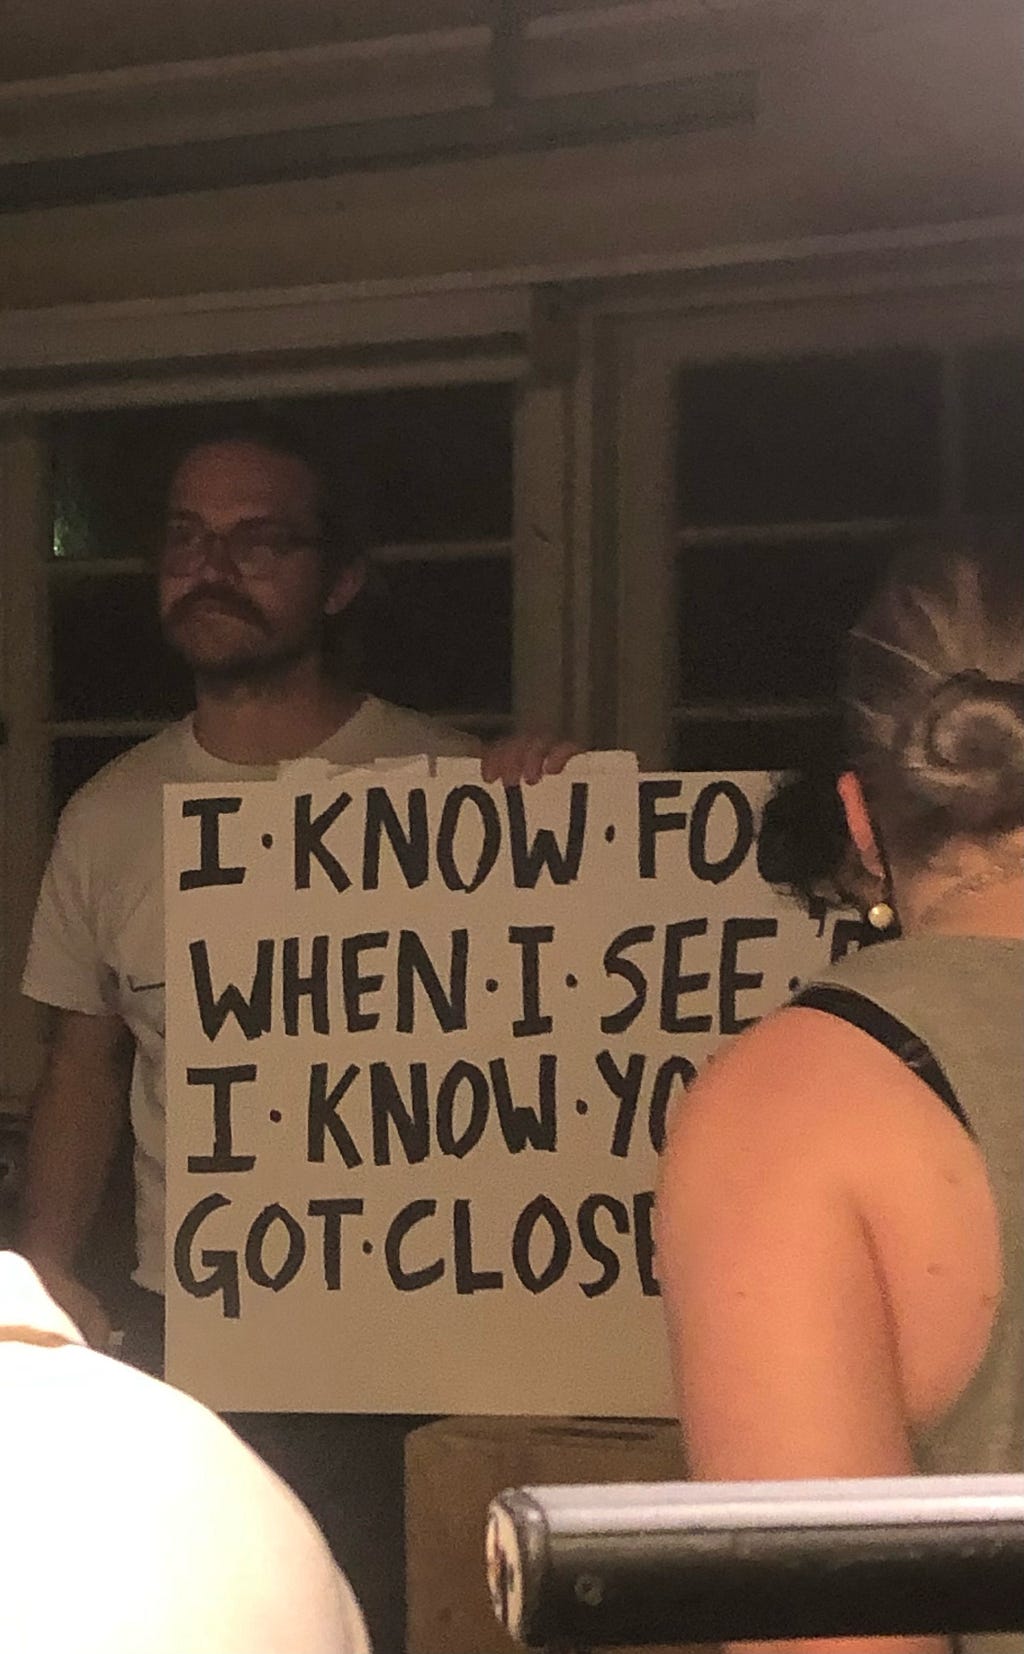 Me, Mitchell Crispi, holding a cue card on a set. The card aptly reads “I know fools when I see them,” though you cannot see the entirety of the card in the photo.